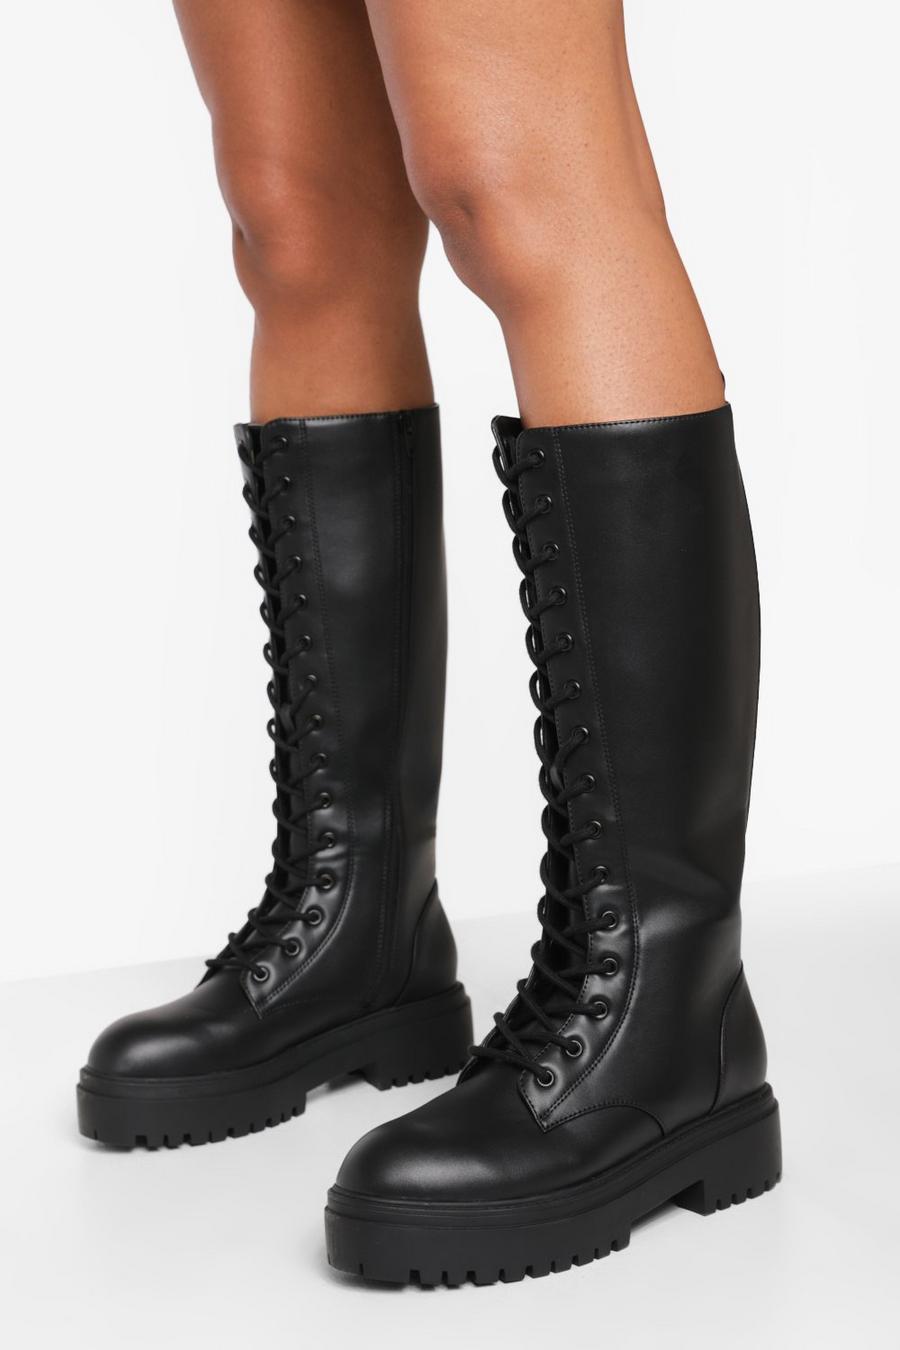 Black Knee High Lace Up Combat Boots